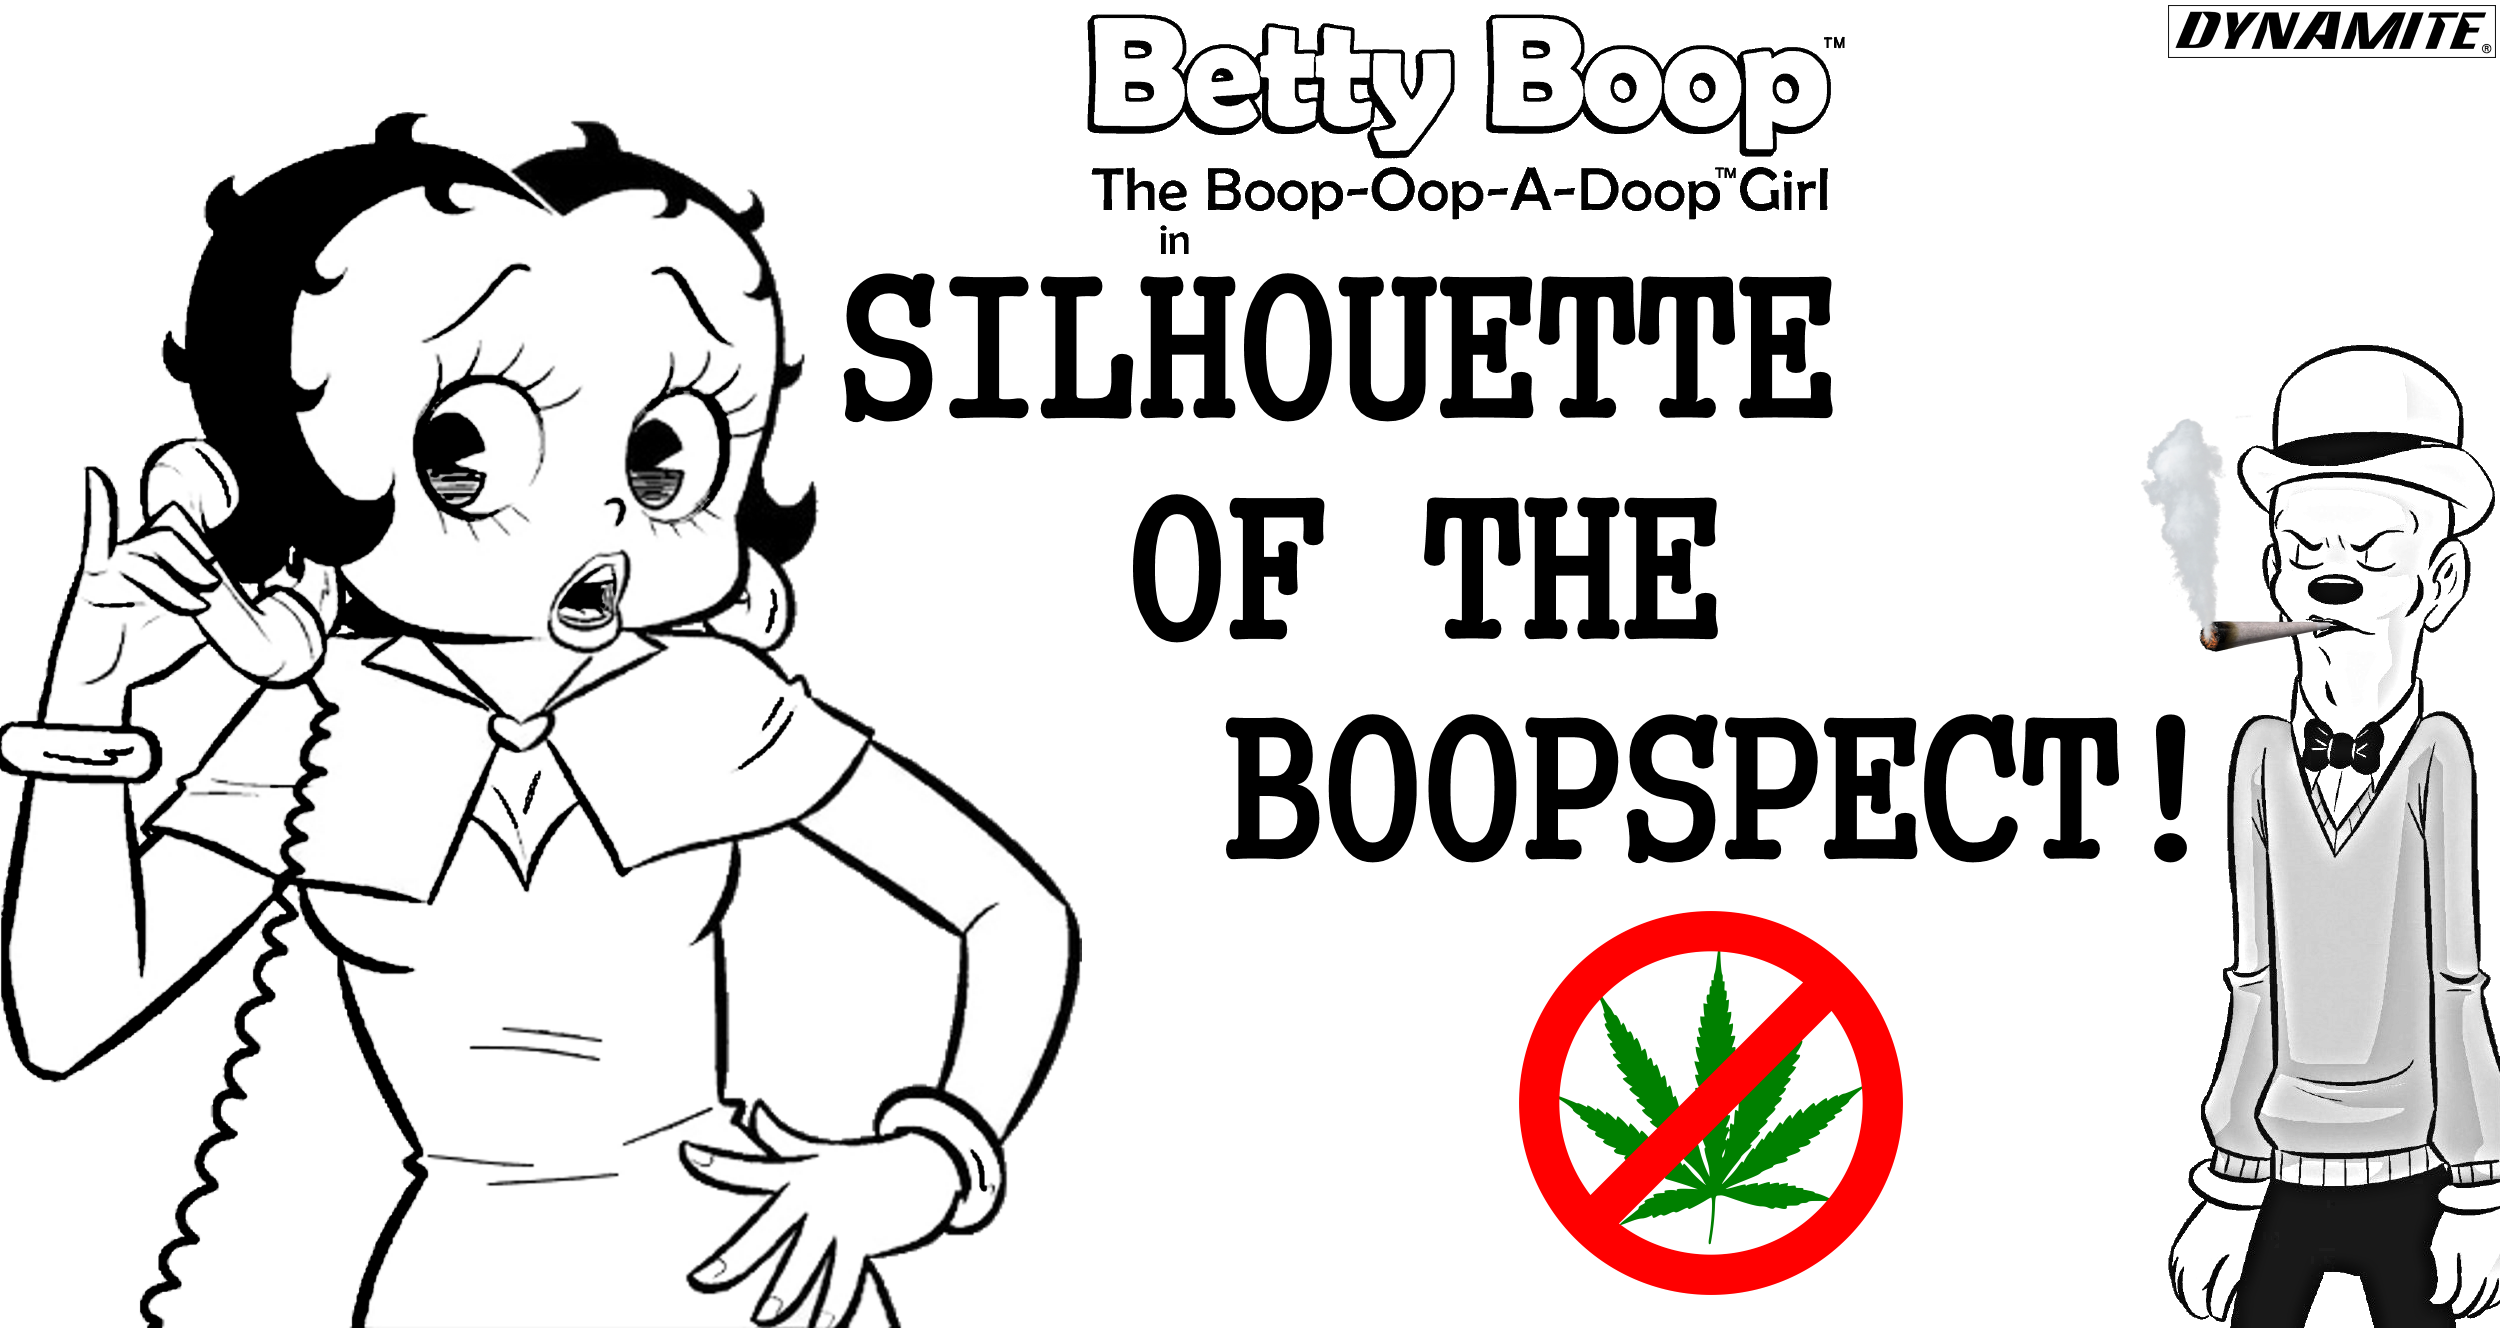 Dynamite Comics - Betty Boop in Silhouette of the Boopspect!